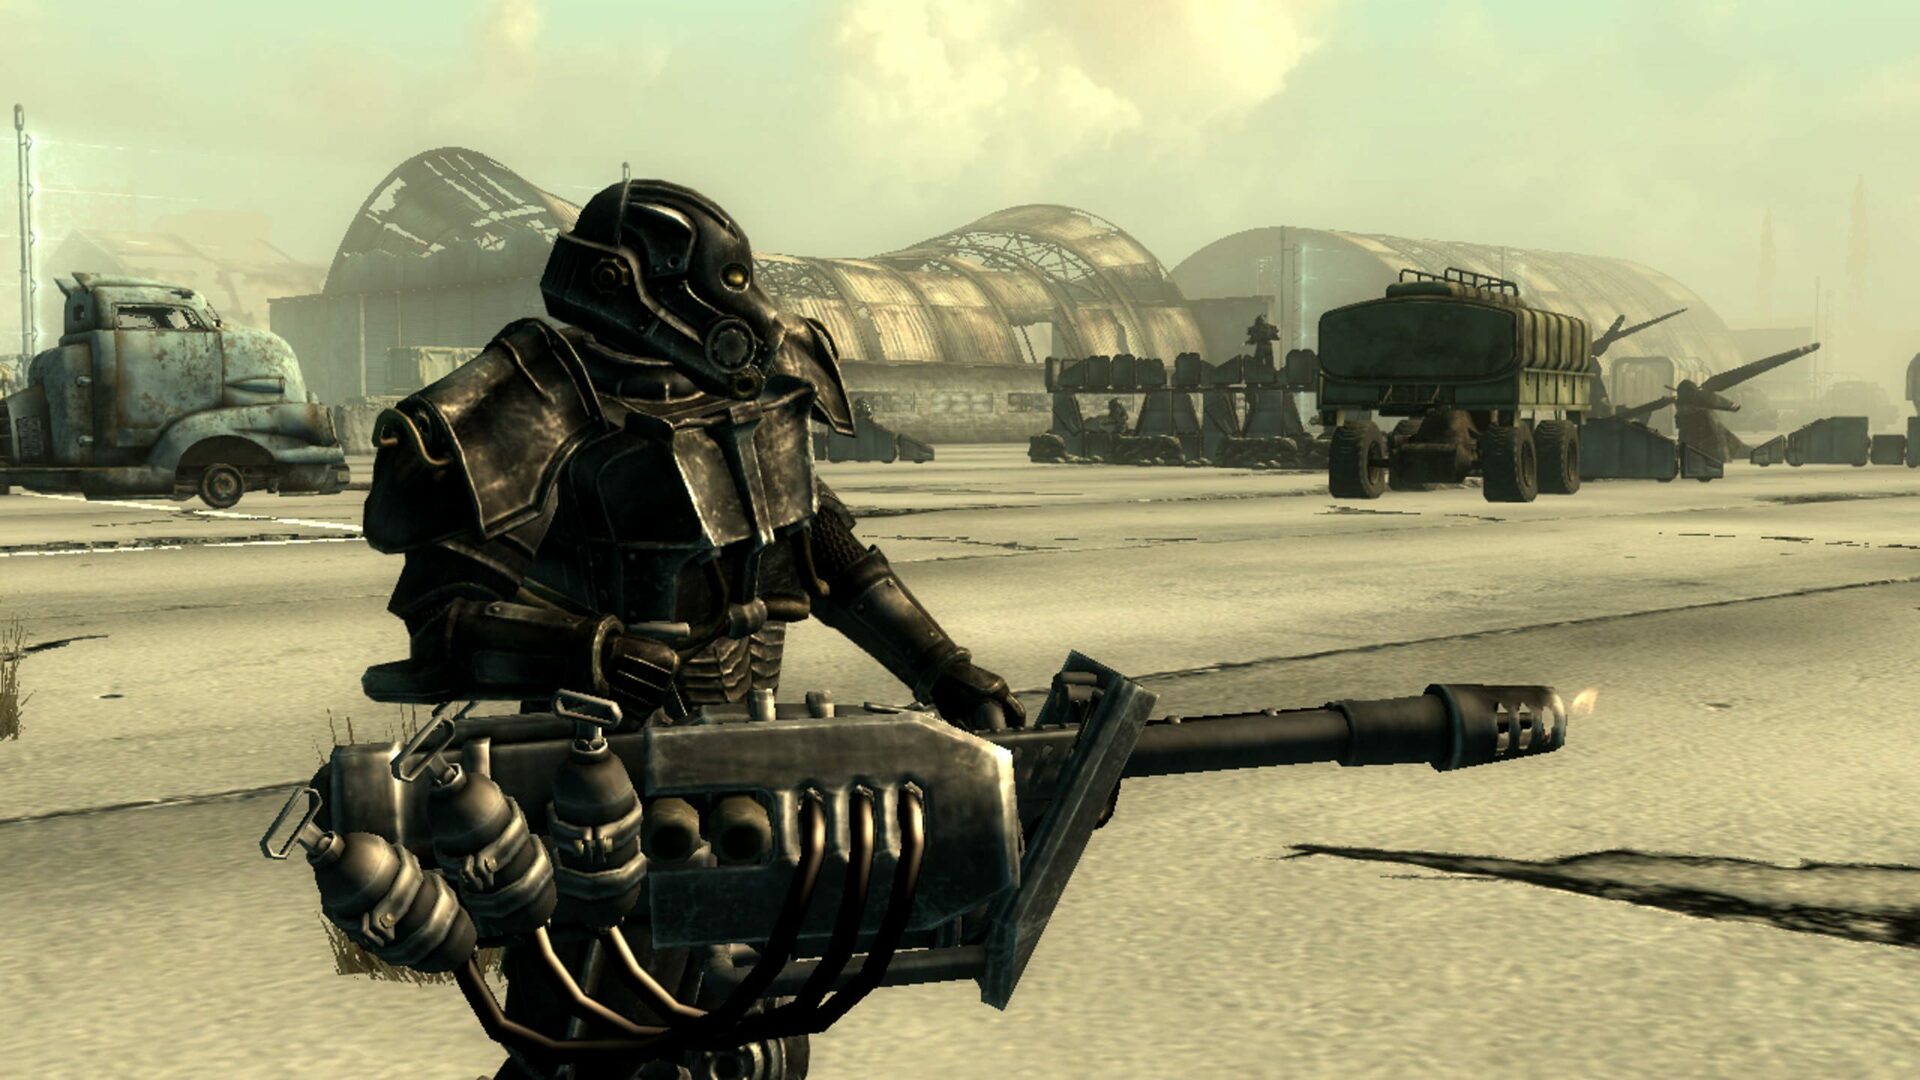 Steam Community :: Guide :: How to make Fallout 3 GOTY work on